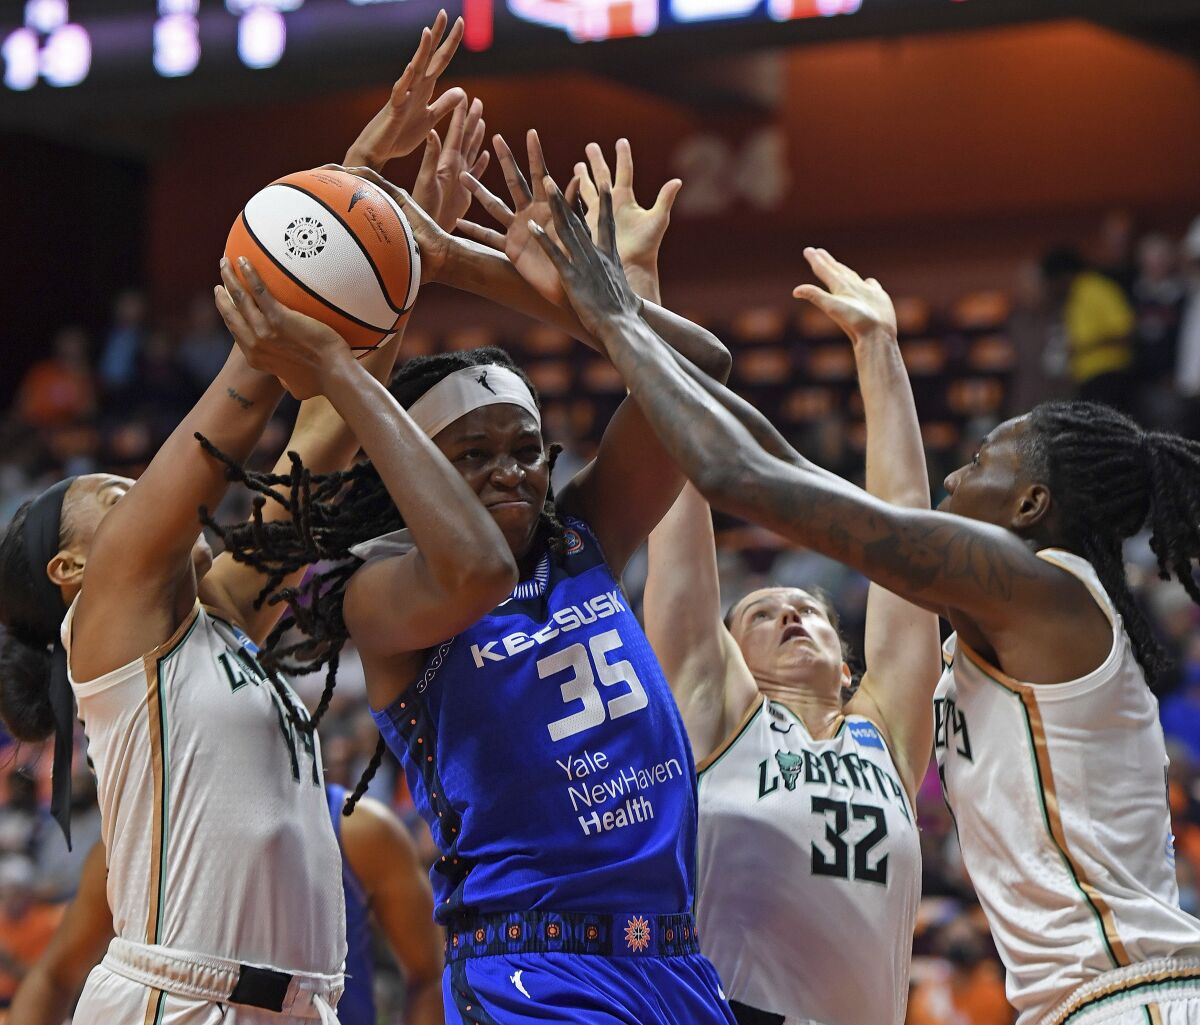 Connecticut Sun forward Jonquel Jones (35) works between New York Liberty defenders Betnijah Laney, left, Sami Whitcomb (32) and Natasha Howard during the first half of a WNBA basketball game Wednesday, Sept. 15, 2021, in Uncasville, Conn. (Sean D. Elliot/The Day via AP)